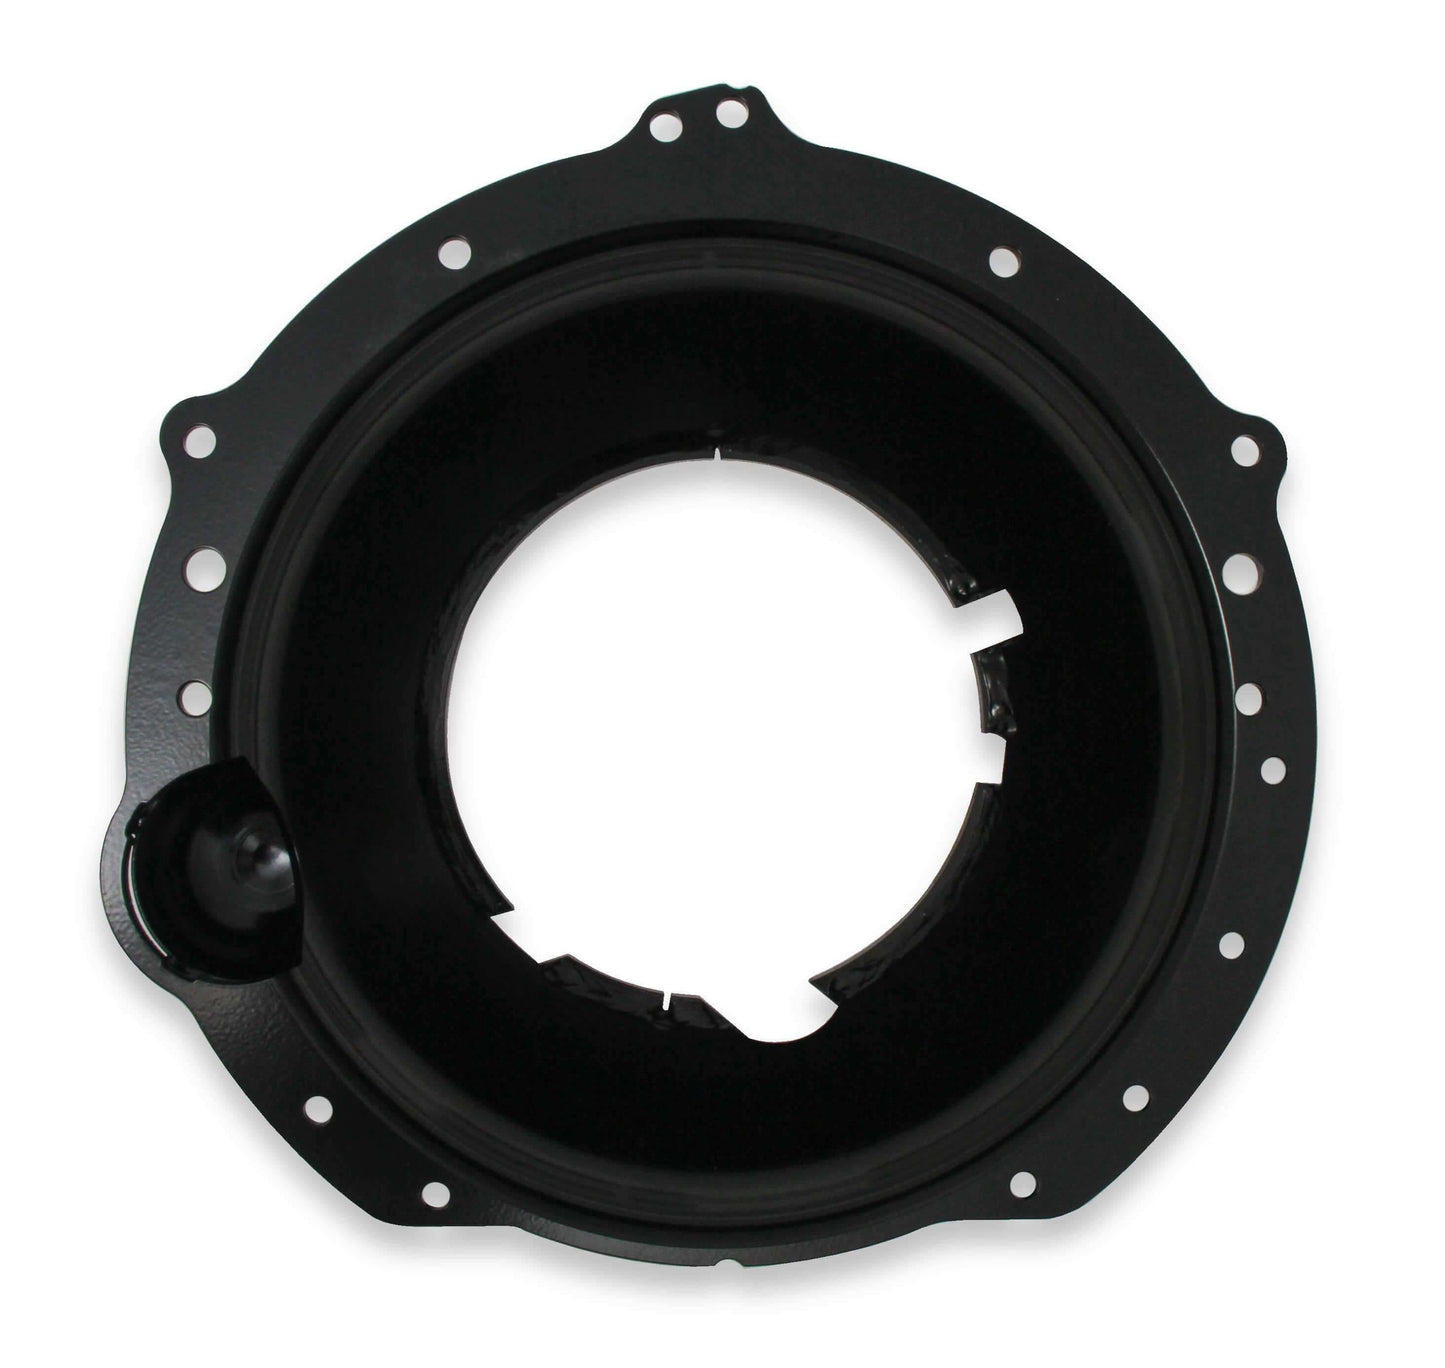 Quick Time Bellhousing - Chevy LS and Late Model LT - Low Profile - RM-8019